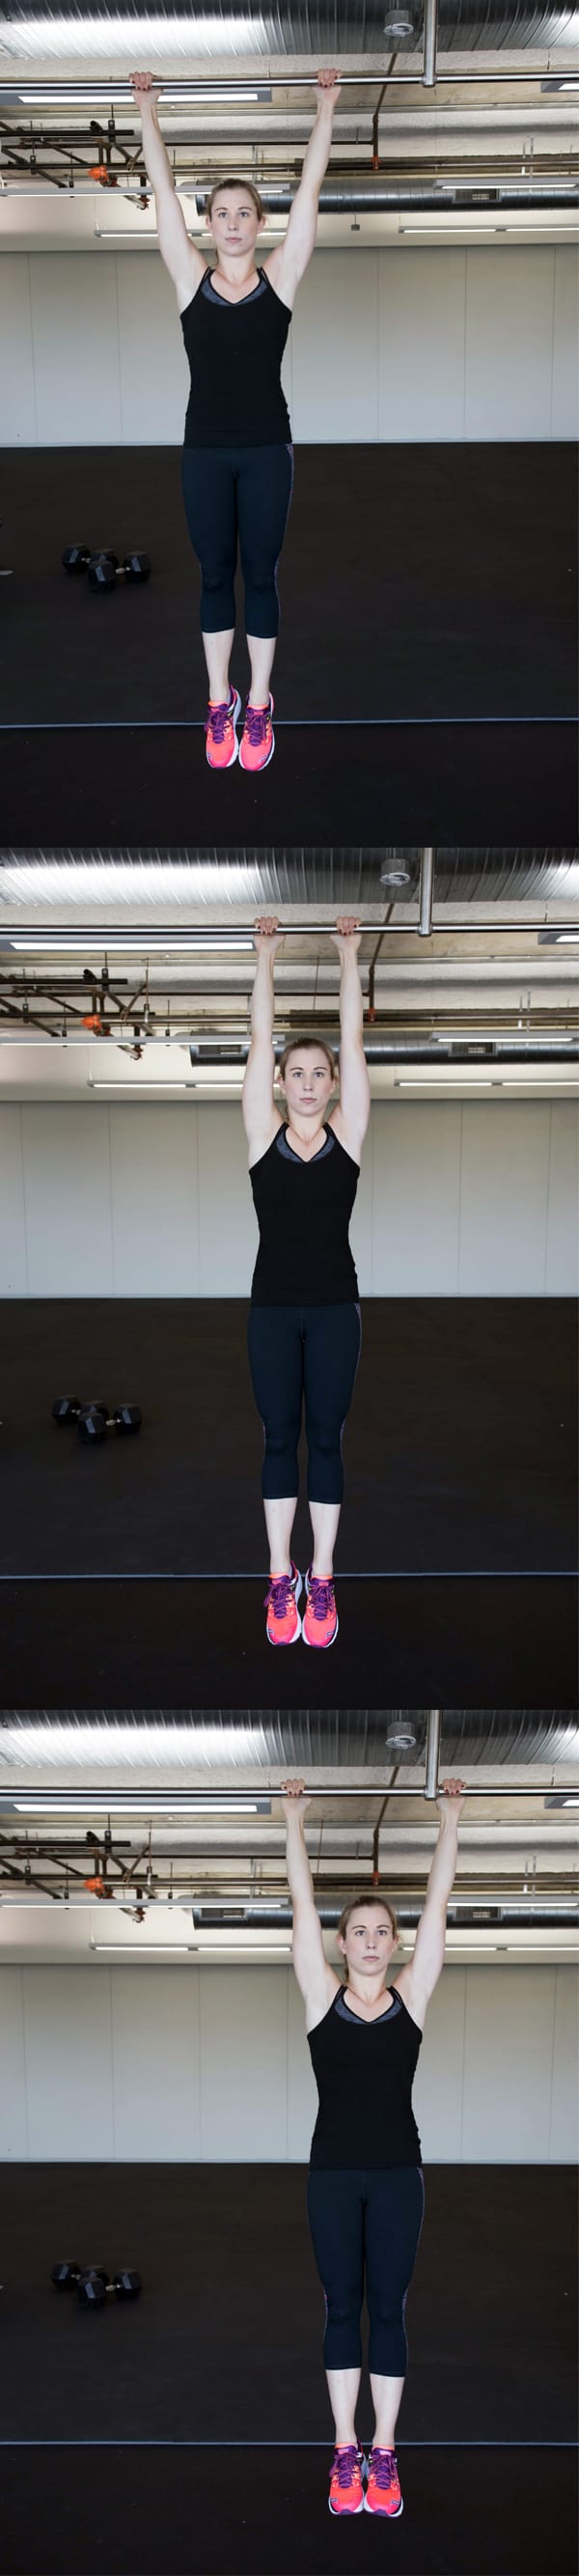 4 Moves That Can Give You Arms Like a Gymnast - Bar Shimmy